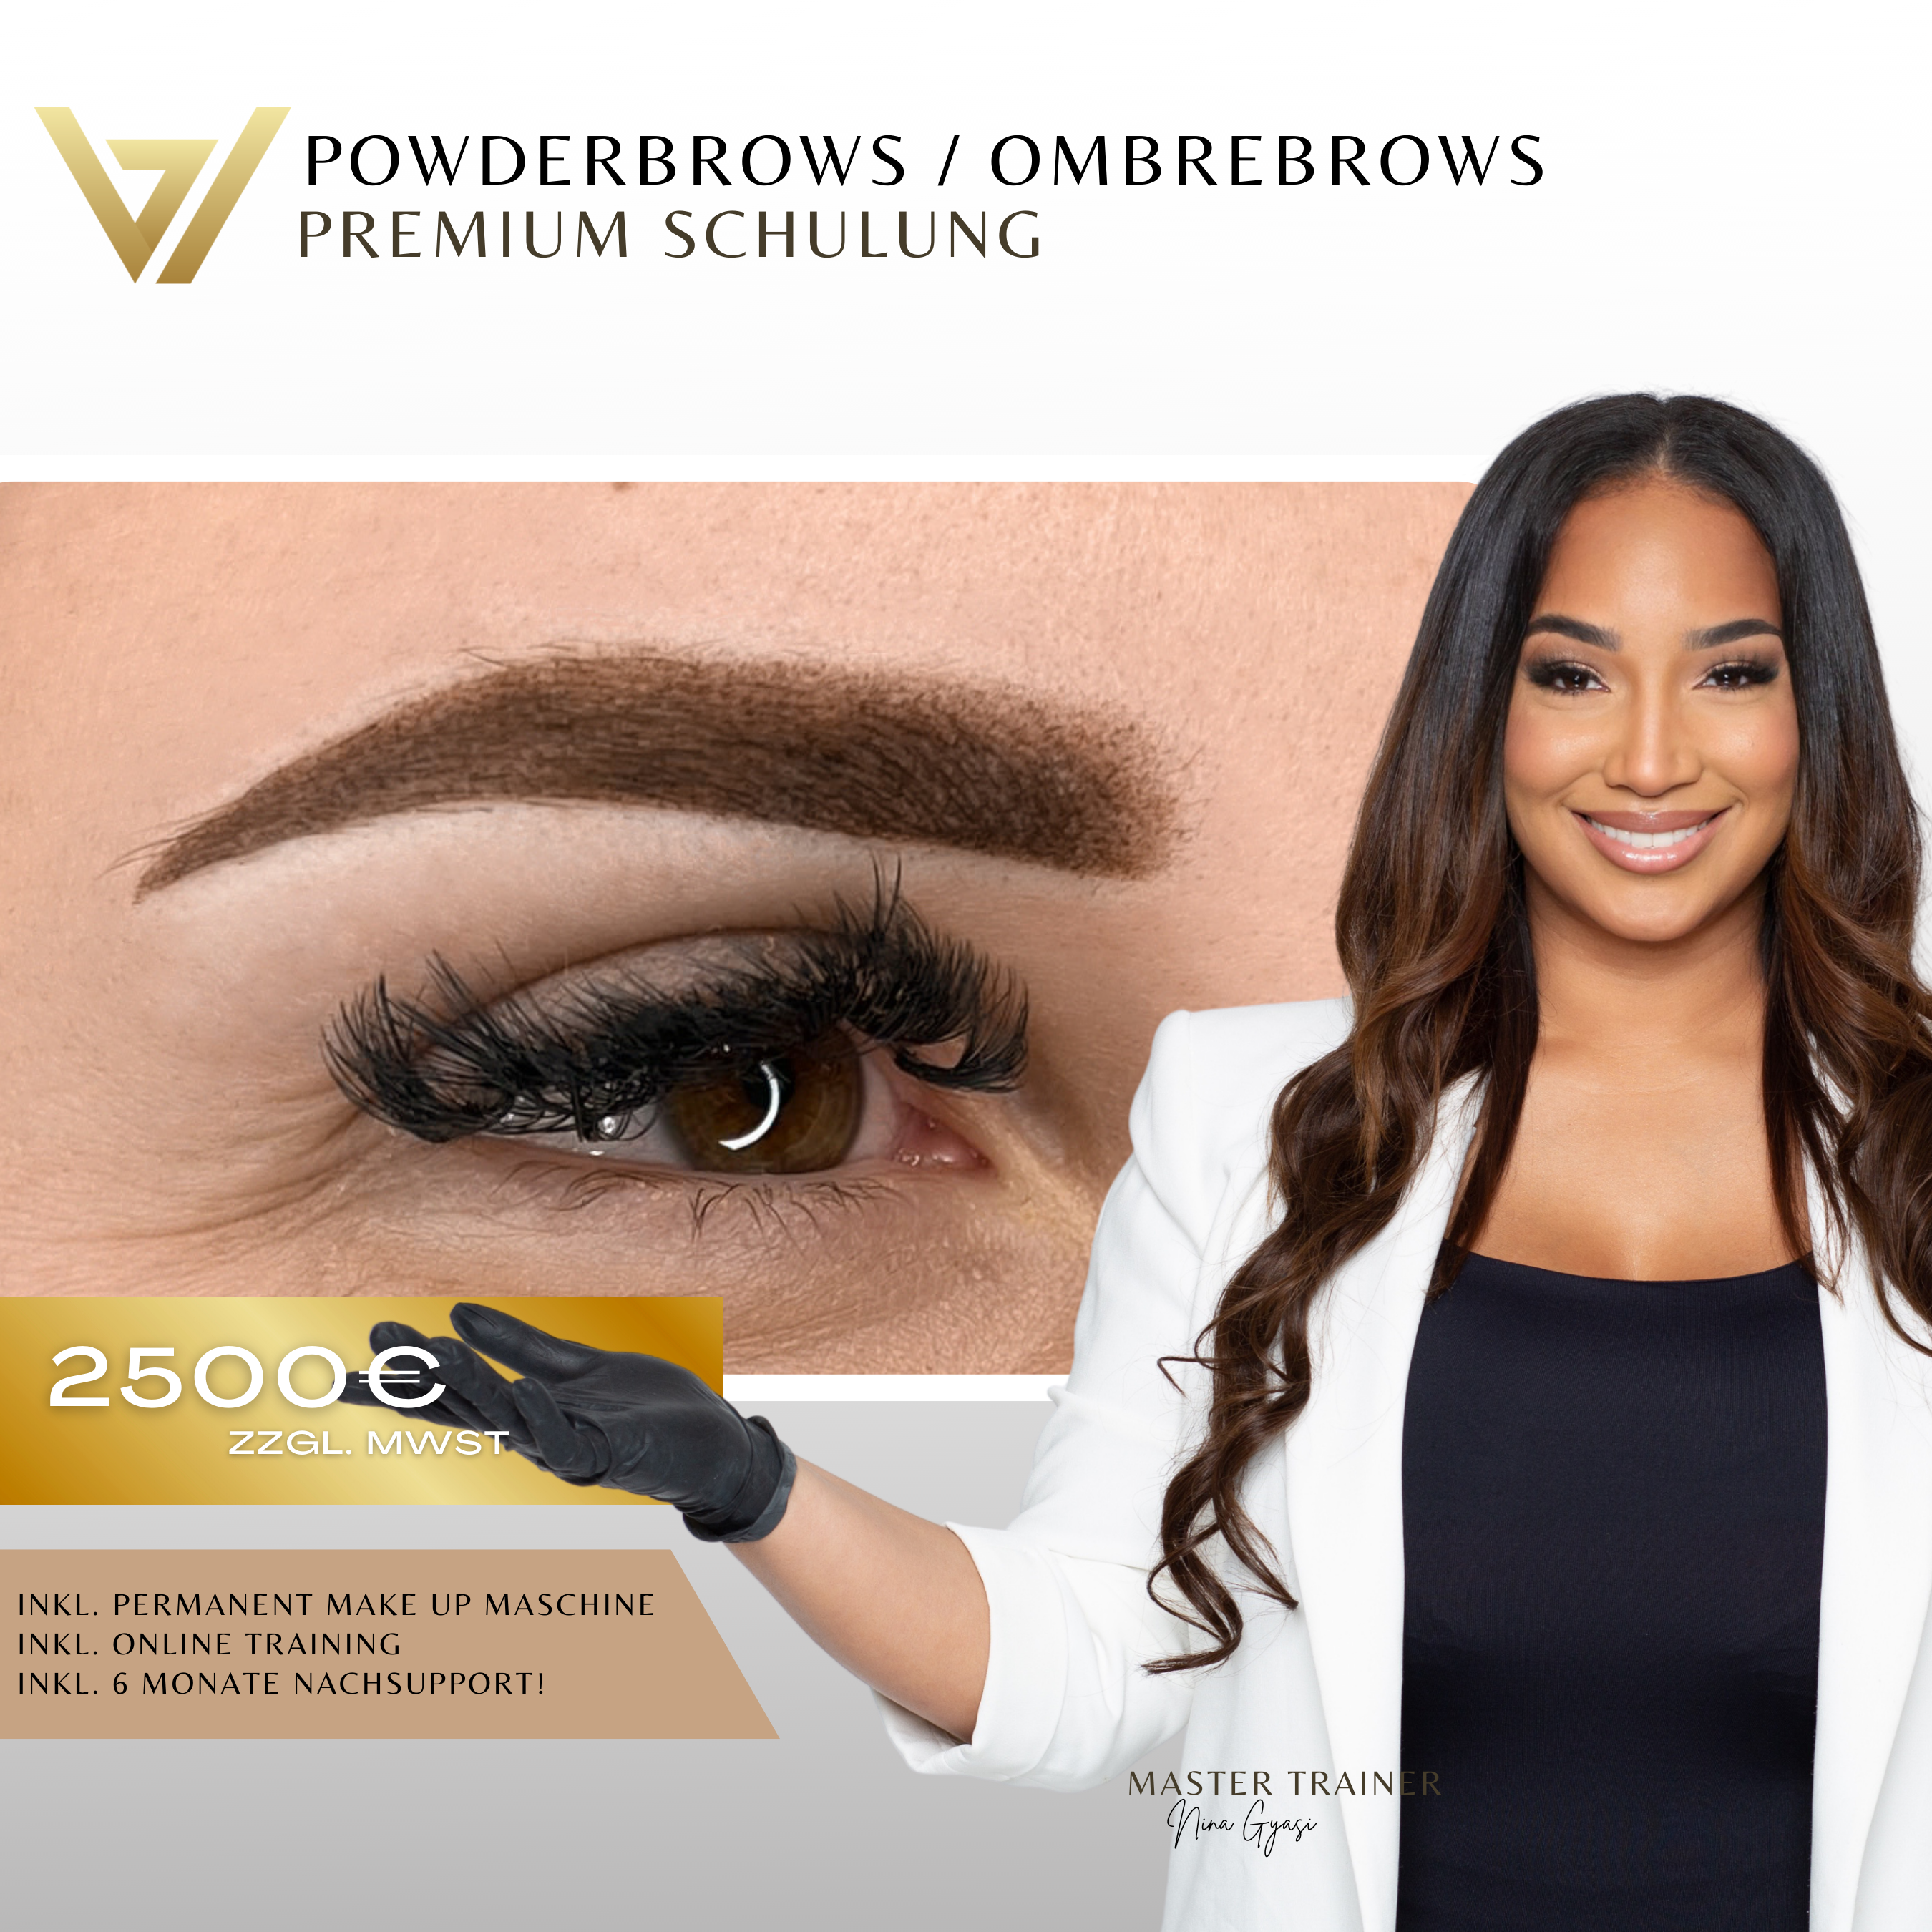 Powderbrows/ Ombrebrows Schulung